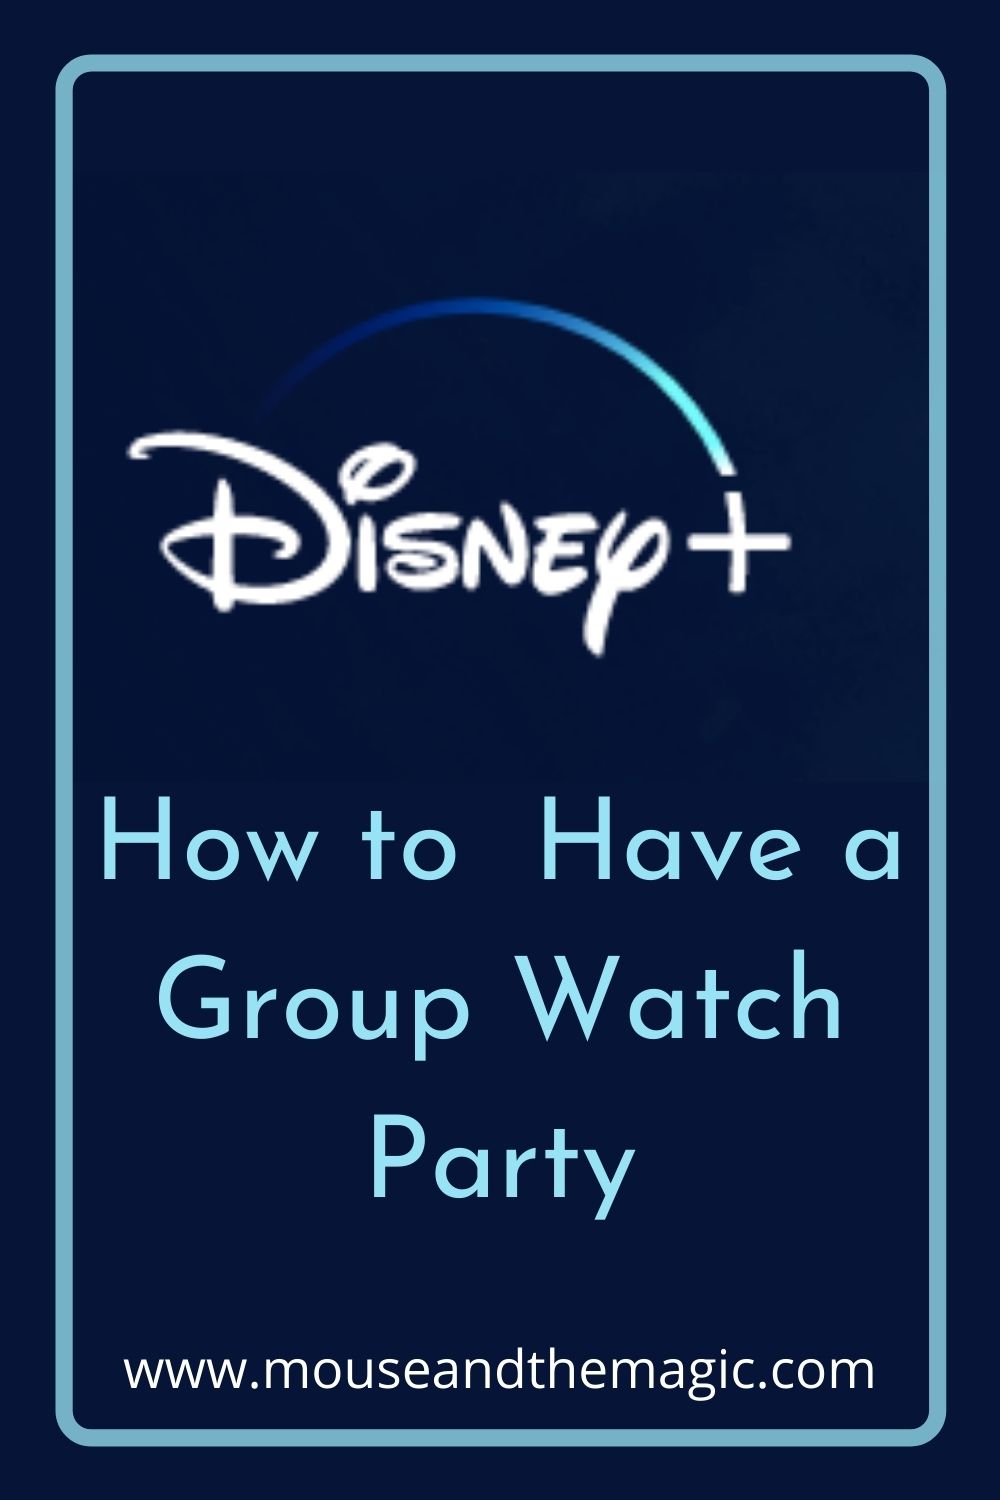 Who Owns What: A Guide to the Watch Groups